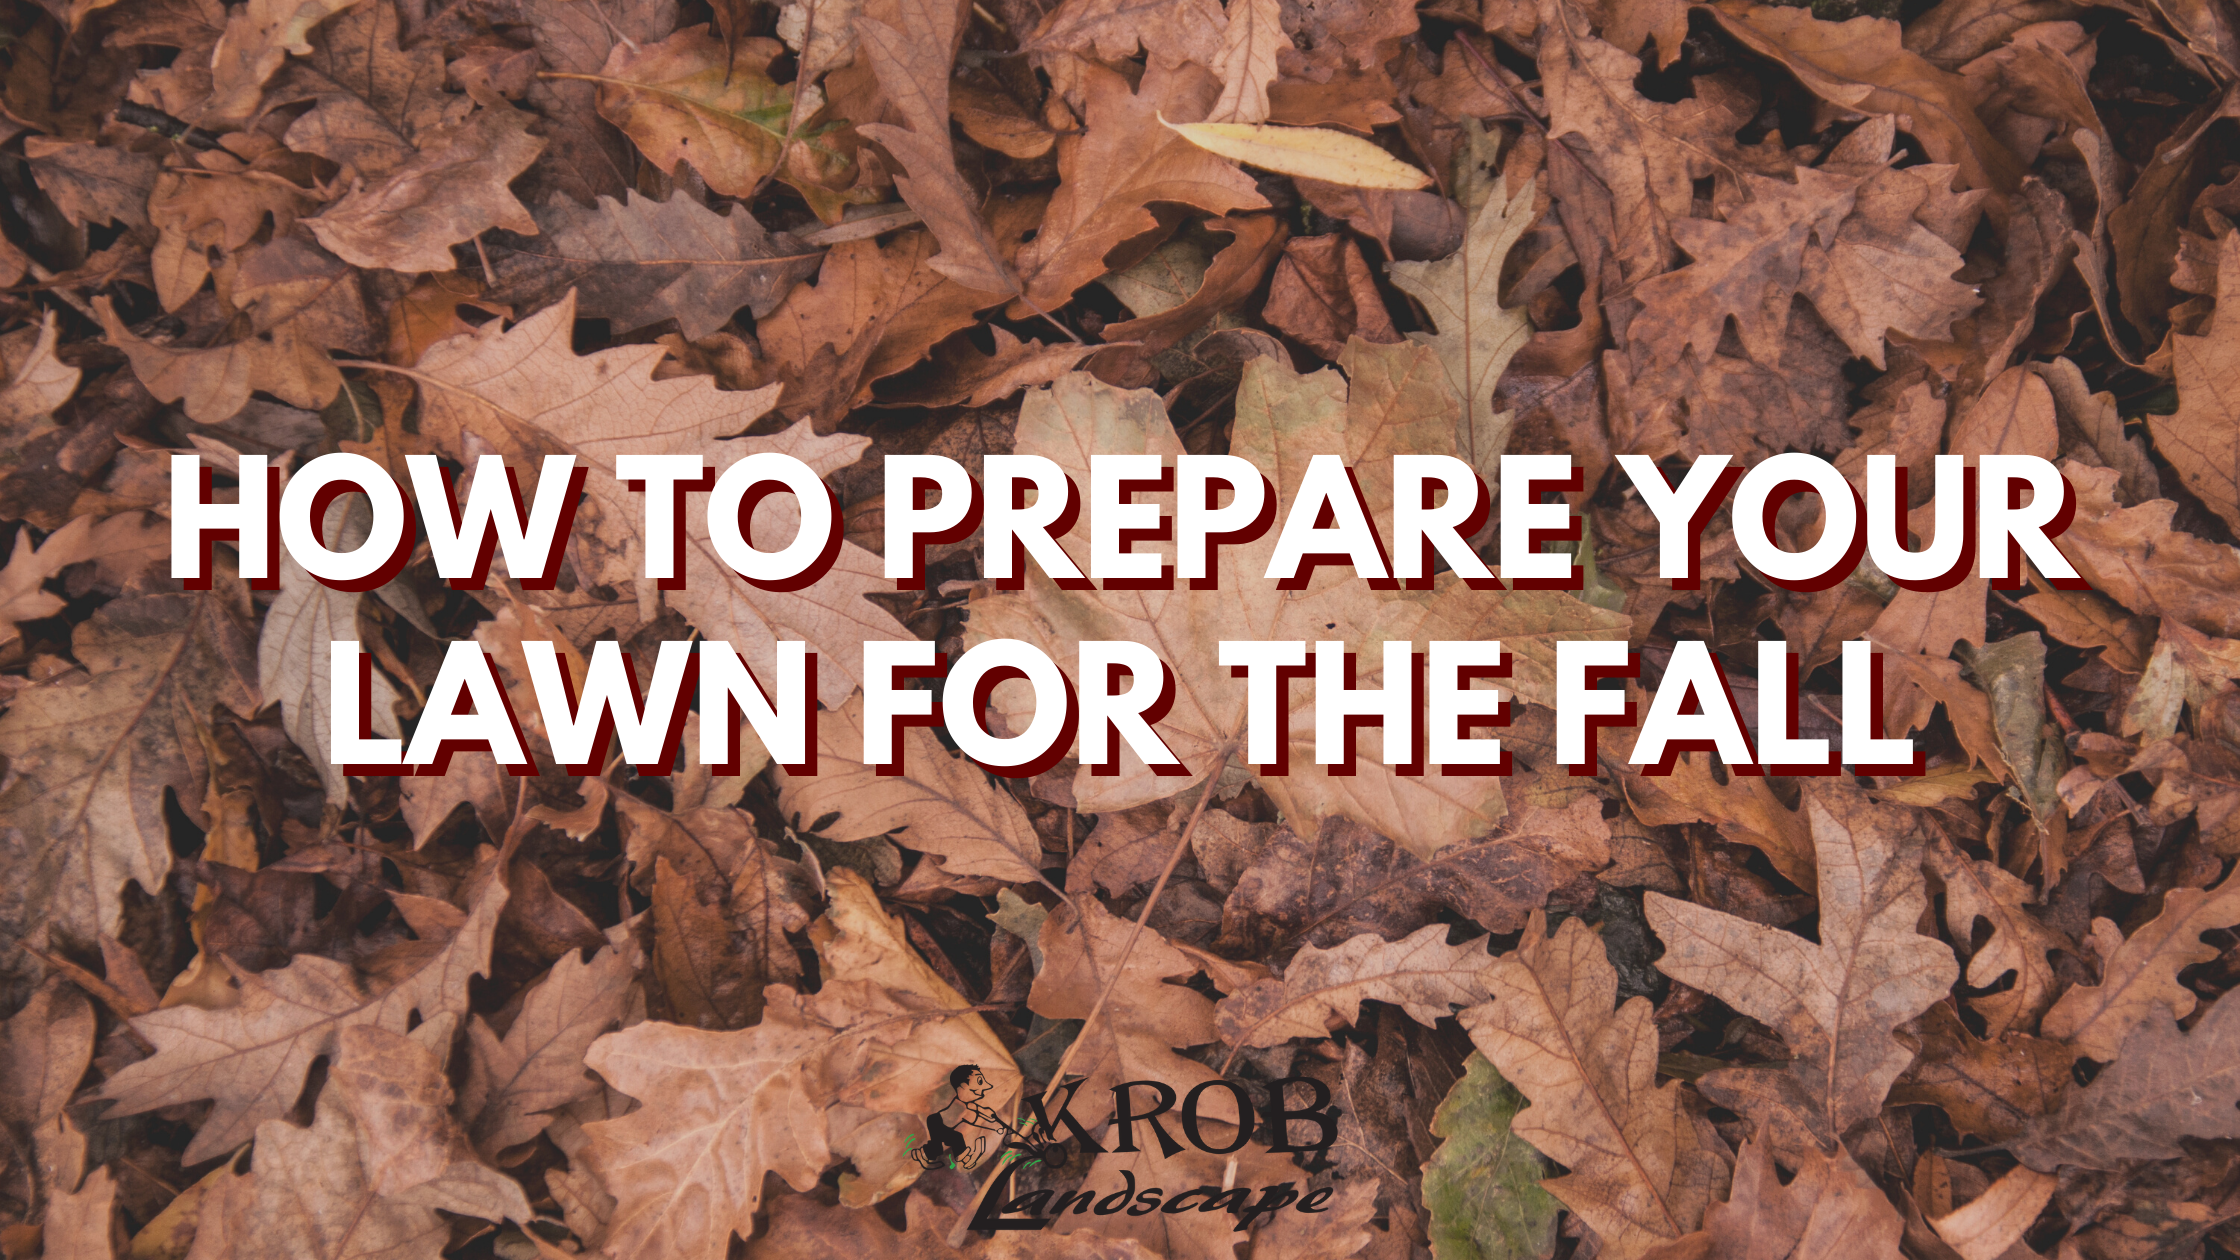 How To Prepare Your Lawn For The Fall.png